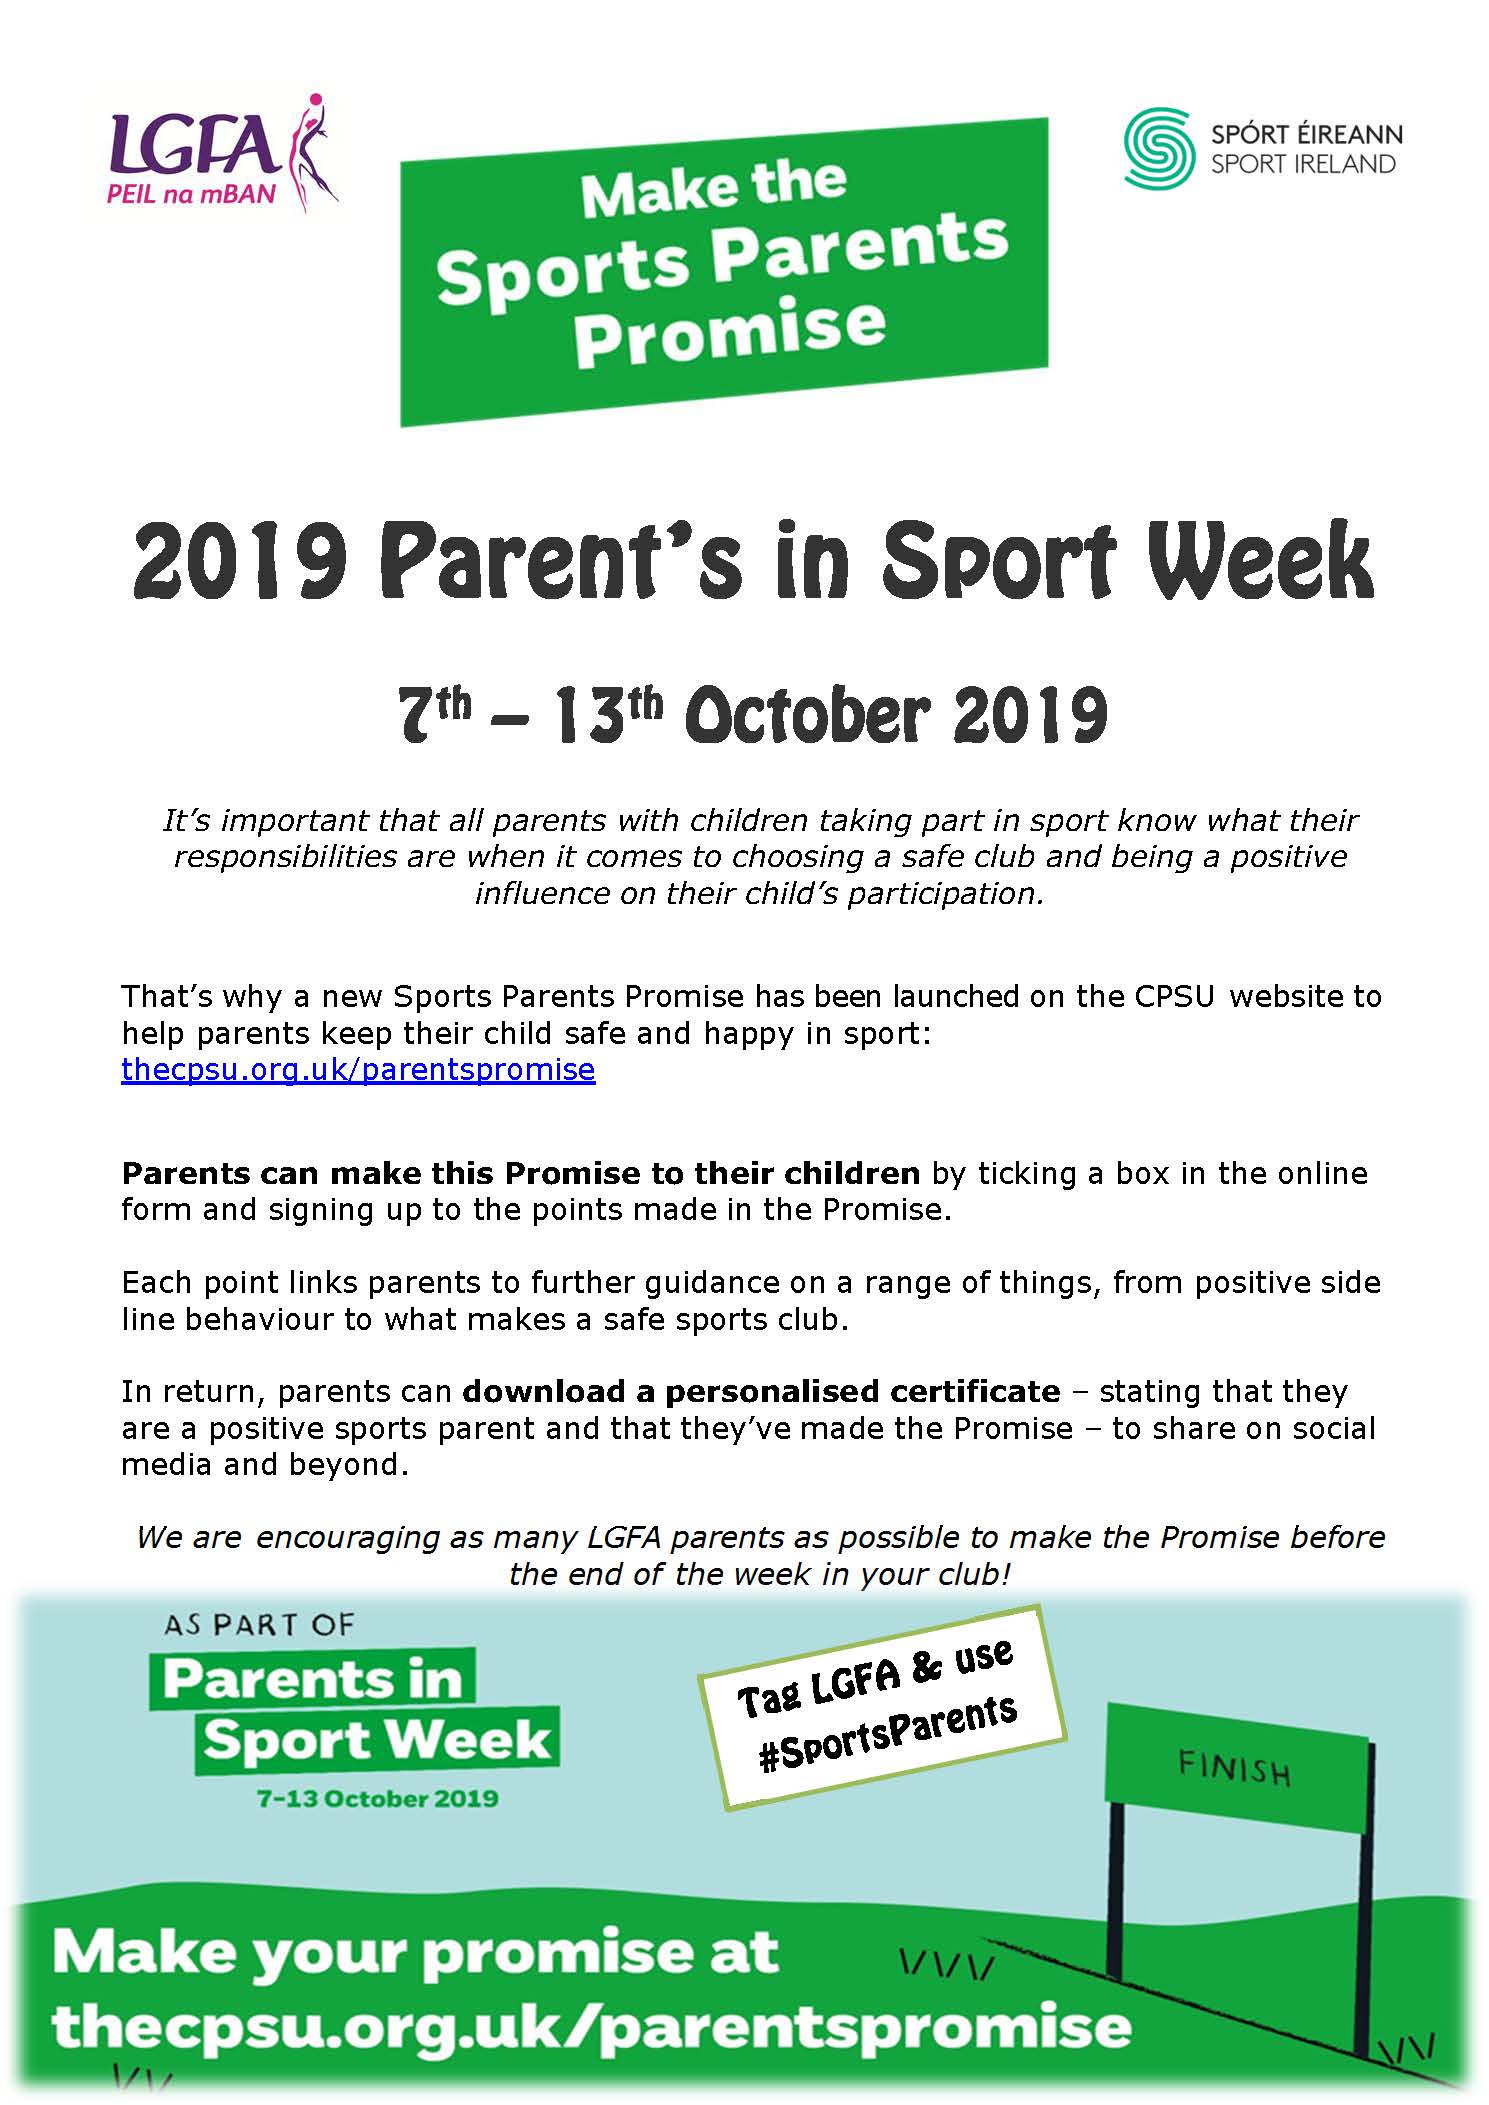 Parents in sports week 2019